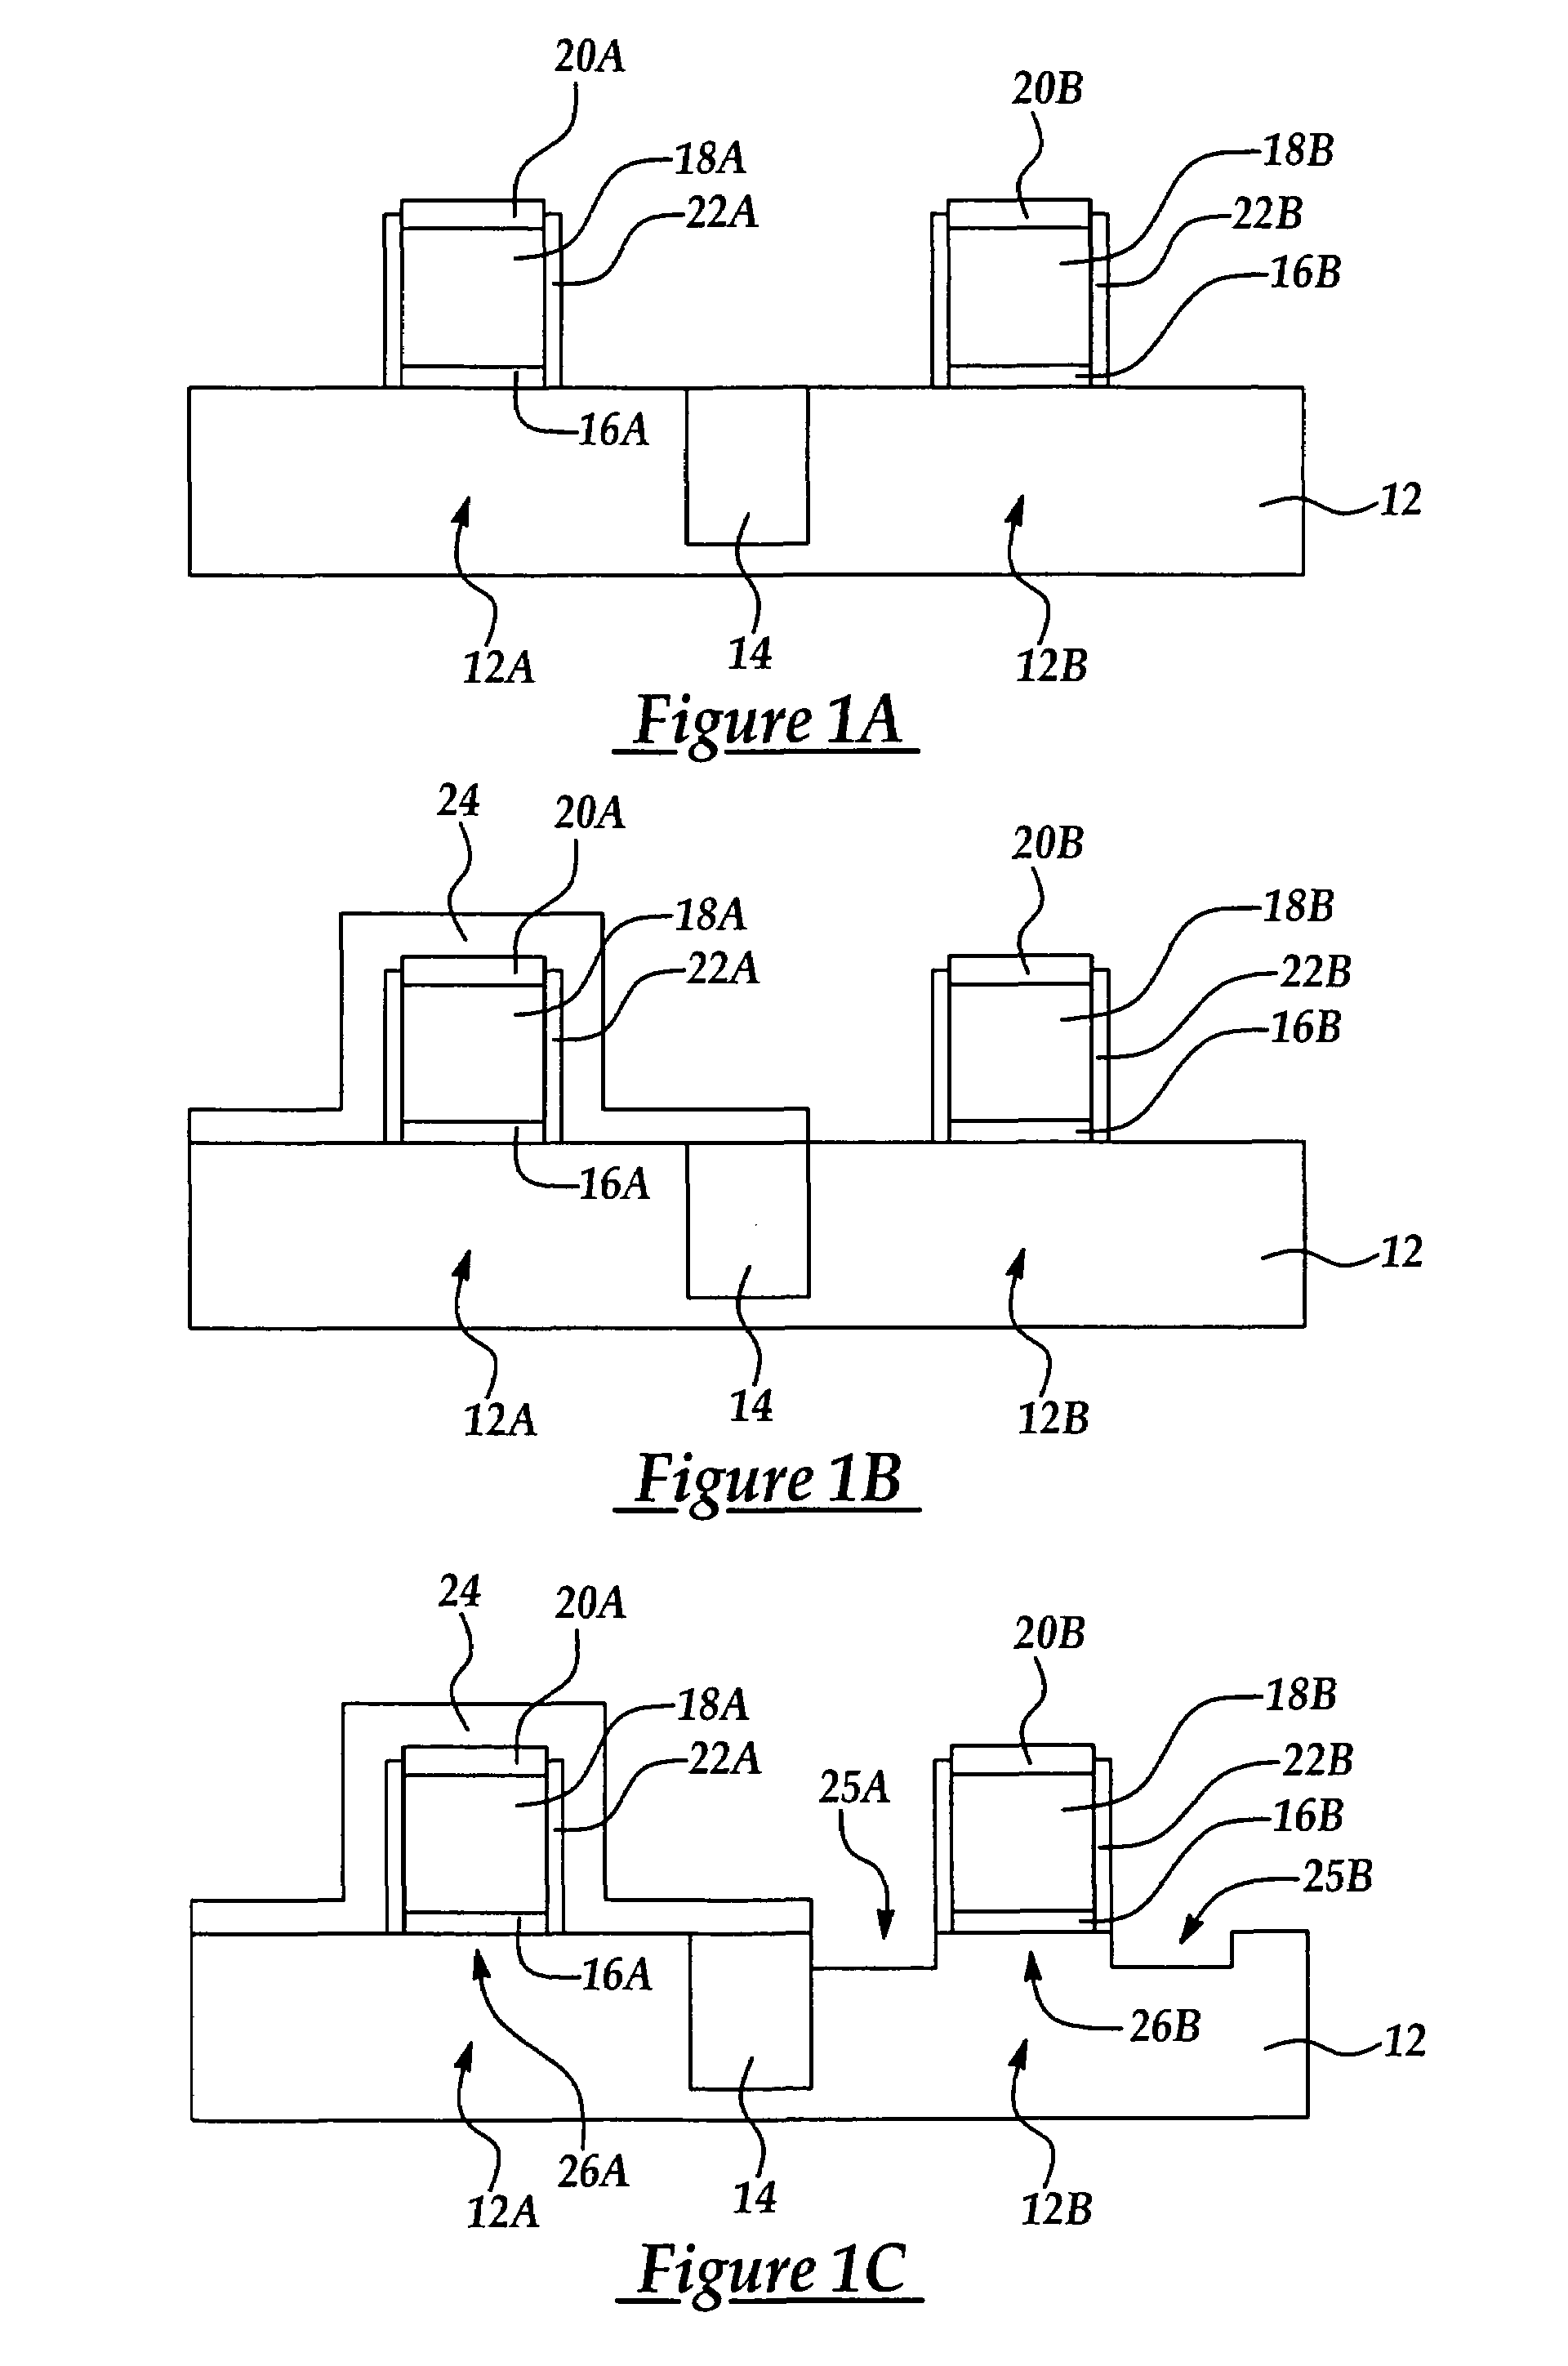 Strained channel CMOS device with fully silicided gate electrode